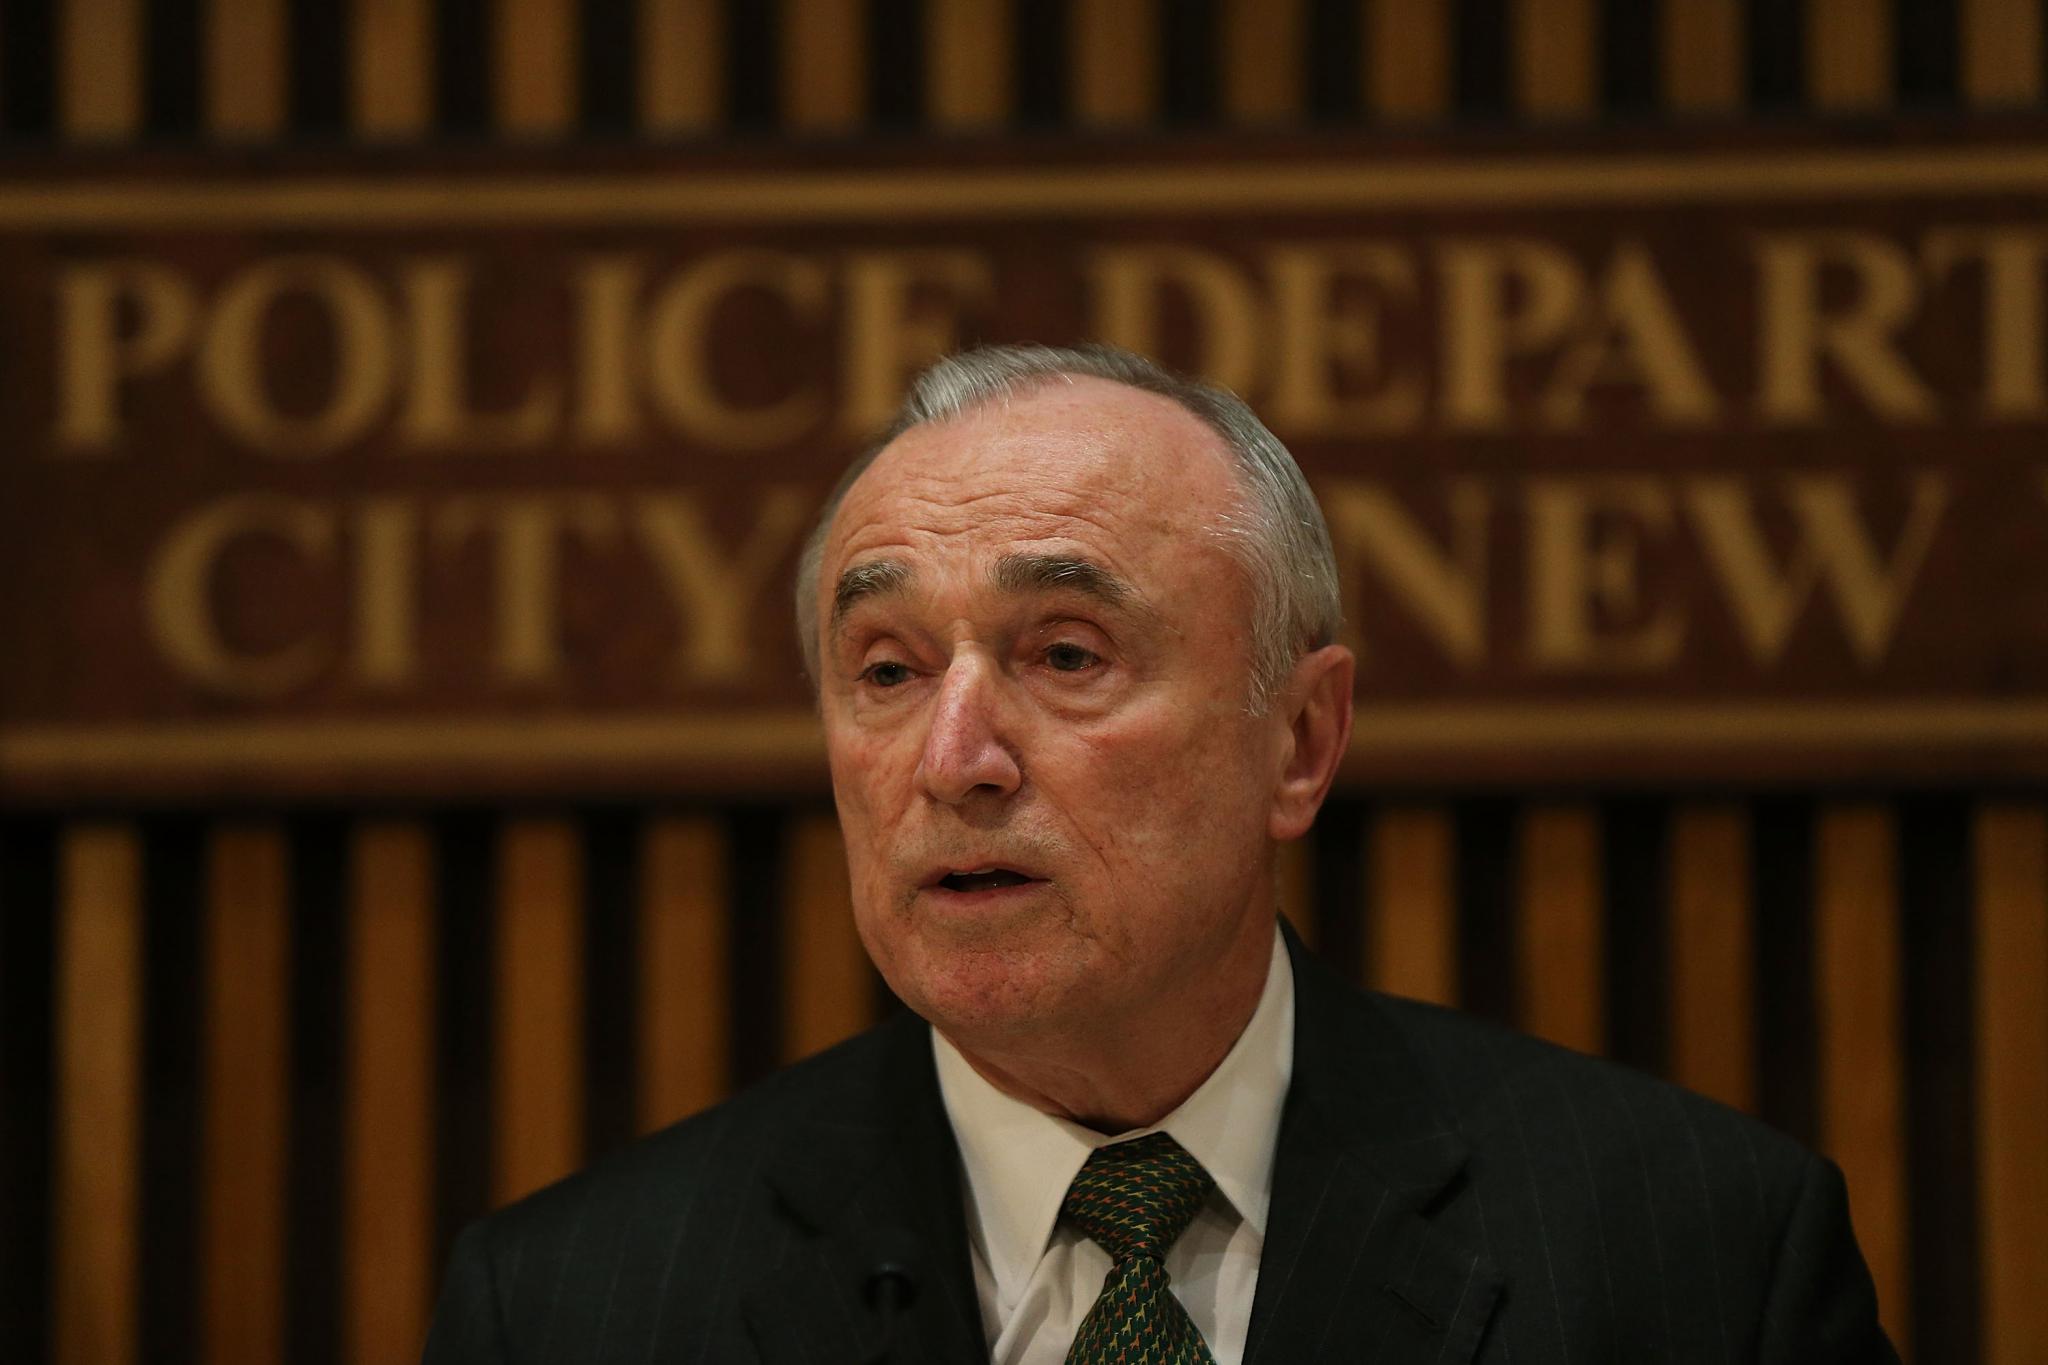 NYPD Commissioner Bill Bratton Says Police Are Responsible for 'Worst Parts' of Black History